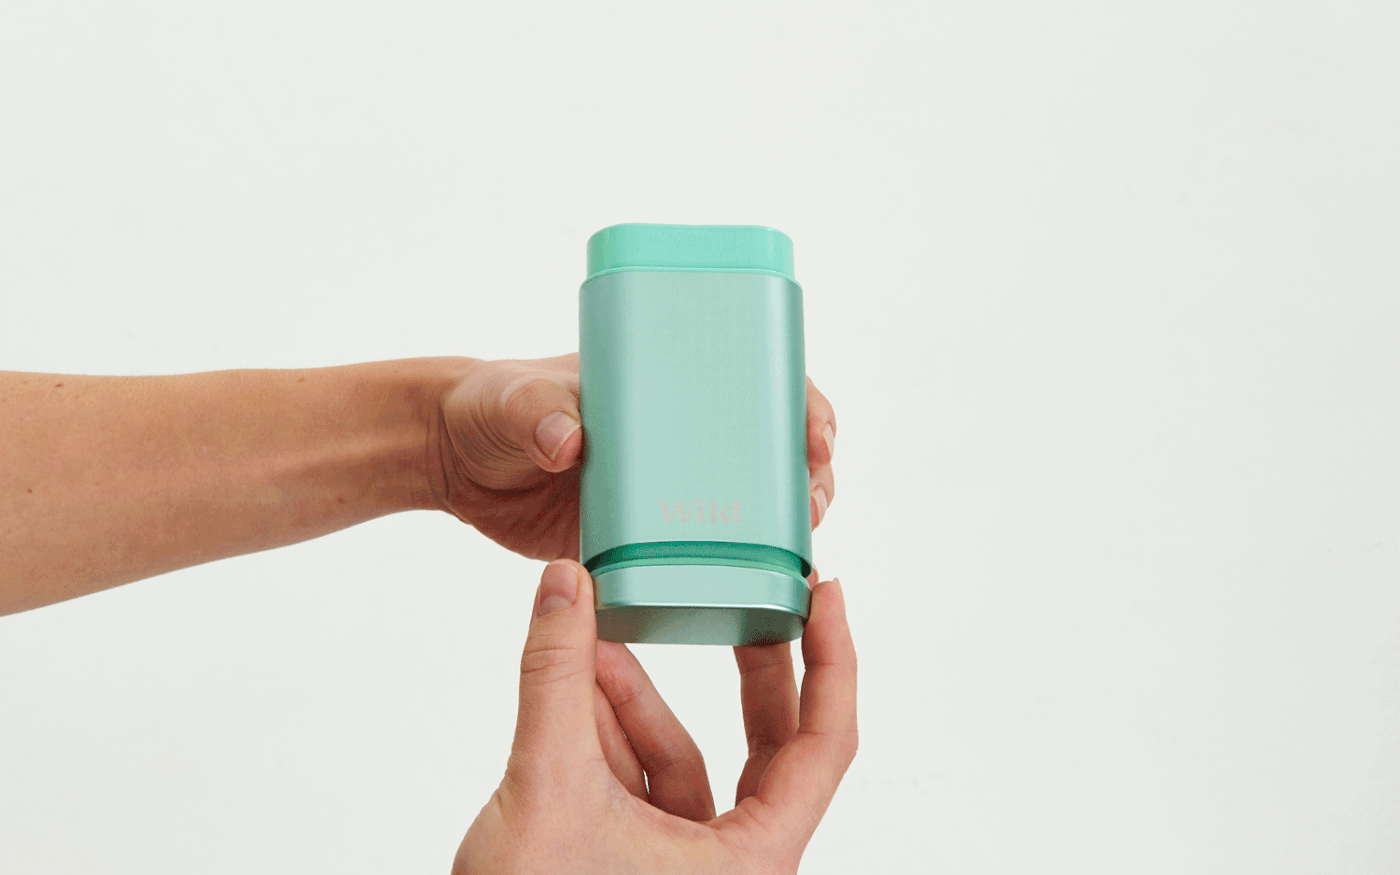 Natural sustainable deodorant brand Wild wants refills to be mass